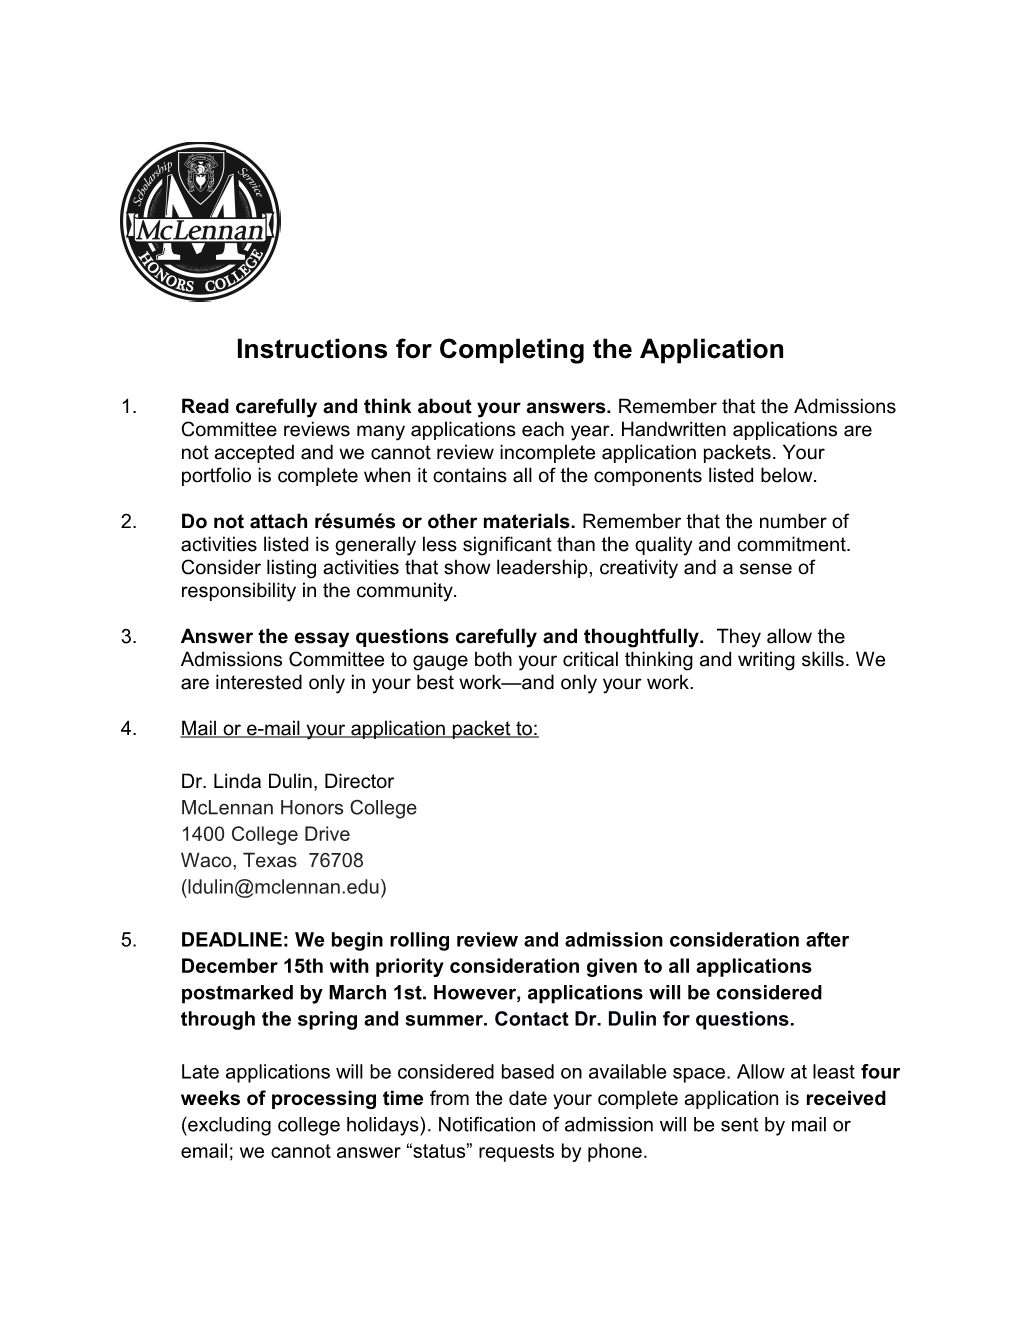 Instructions for Completing the Application